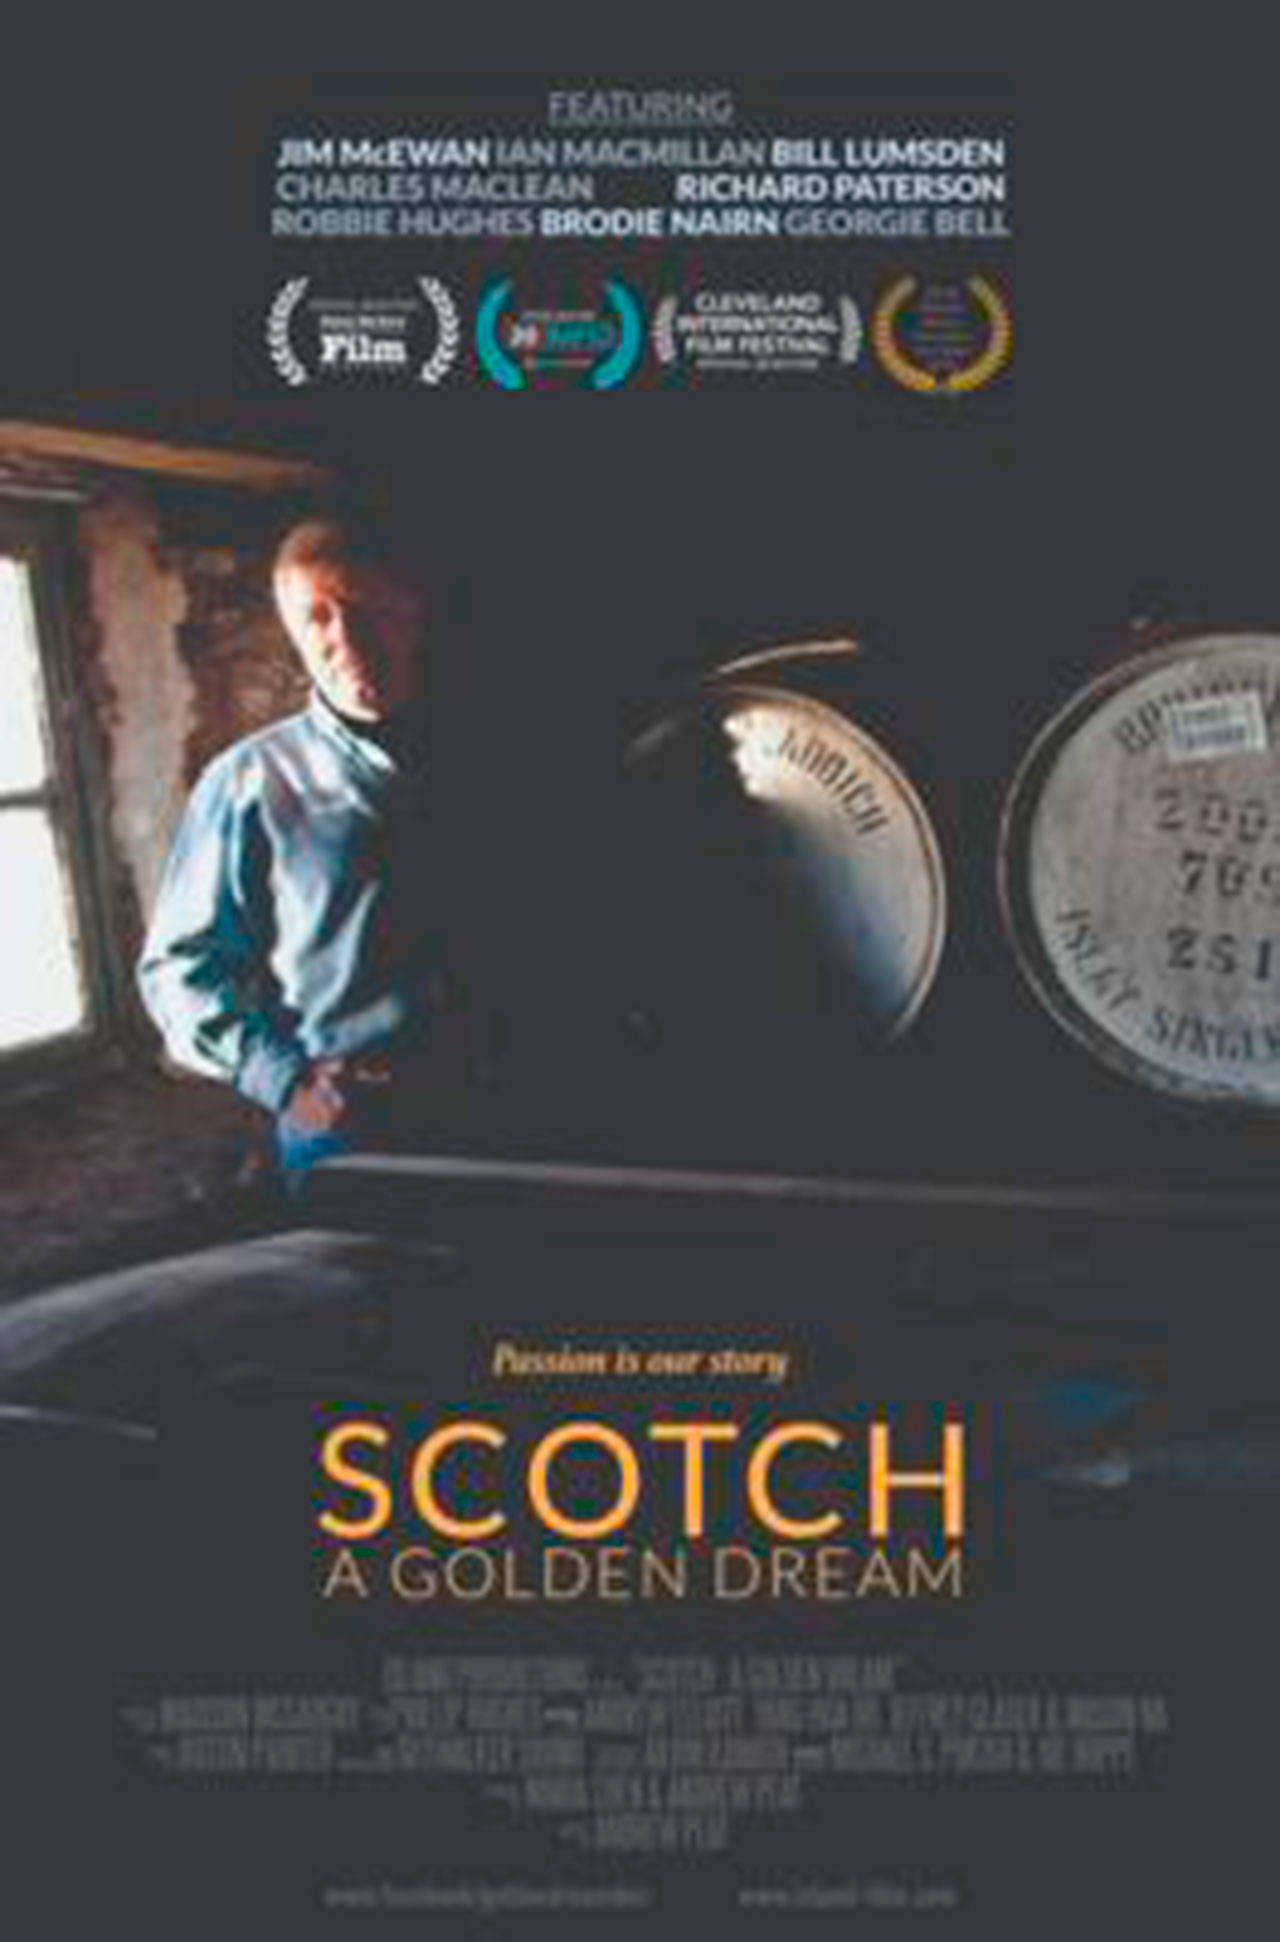 Image courtesy of the Bainbridge Island Museum of Art | Andrew Peat’s documentary about Scotland’s whisky industry, “Scotch: A Golden Dream” (2017), will continue the latest smARTfilm series at the Bainbridge Island Museum of ARt at 7:30 p.m. Tuesday, Oct. 16.